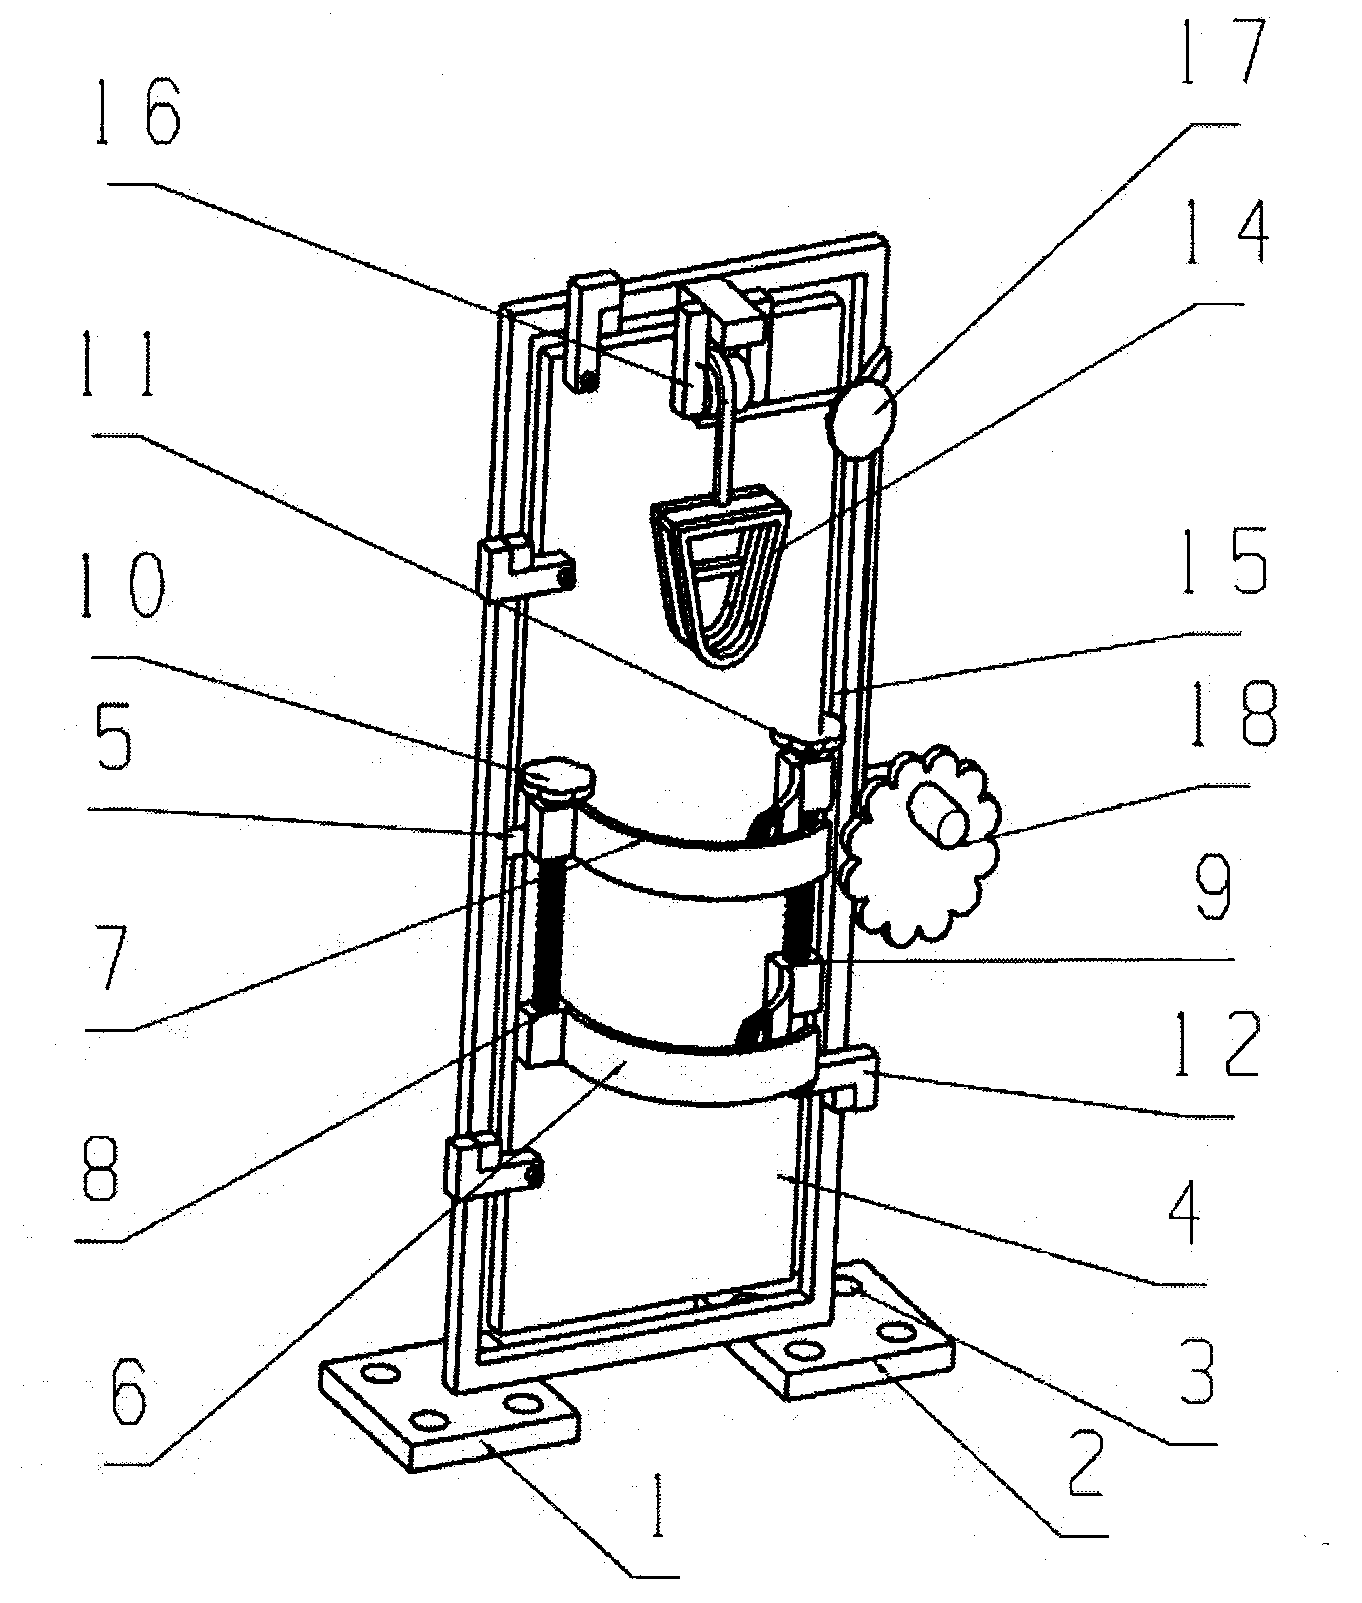 Spinal disease prevention and rehabilitation device